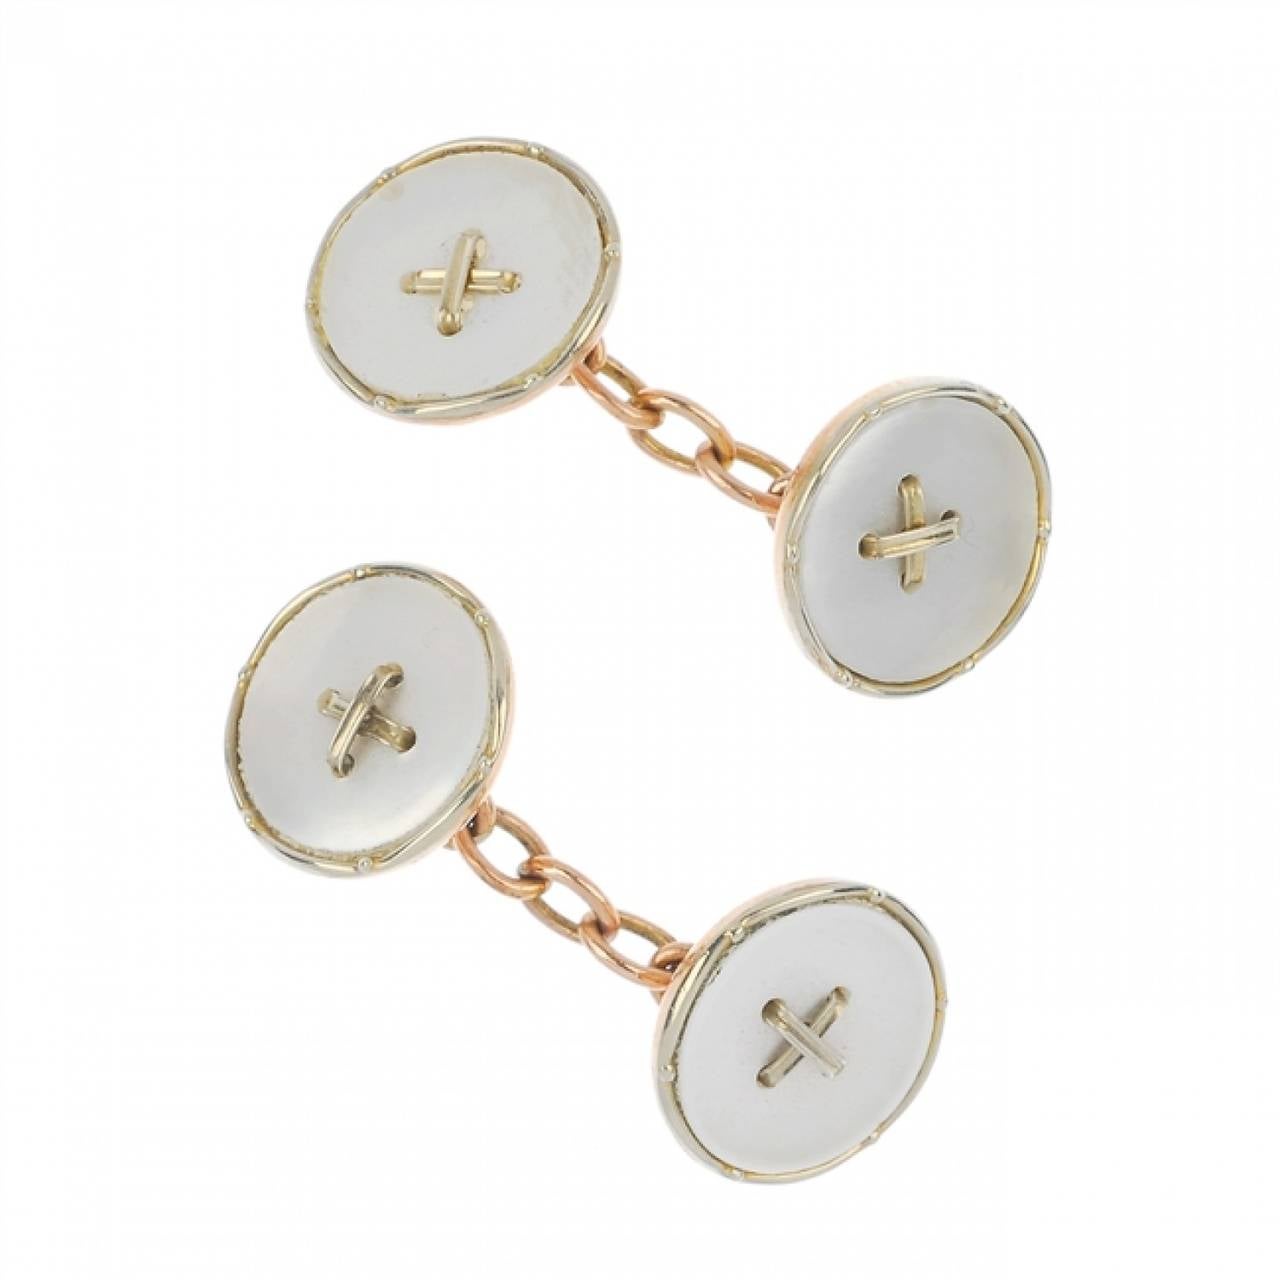 An early 20th century gold mother-of-pearl dress set, comprising cuff-links designed as two circular-shape mother-of-pearl discs, with central cross motif and connecting chain, with matching buttons and studs. Supplied with associated case. 9ct